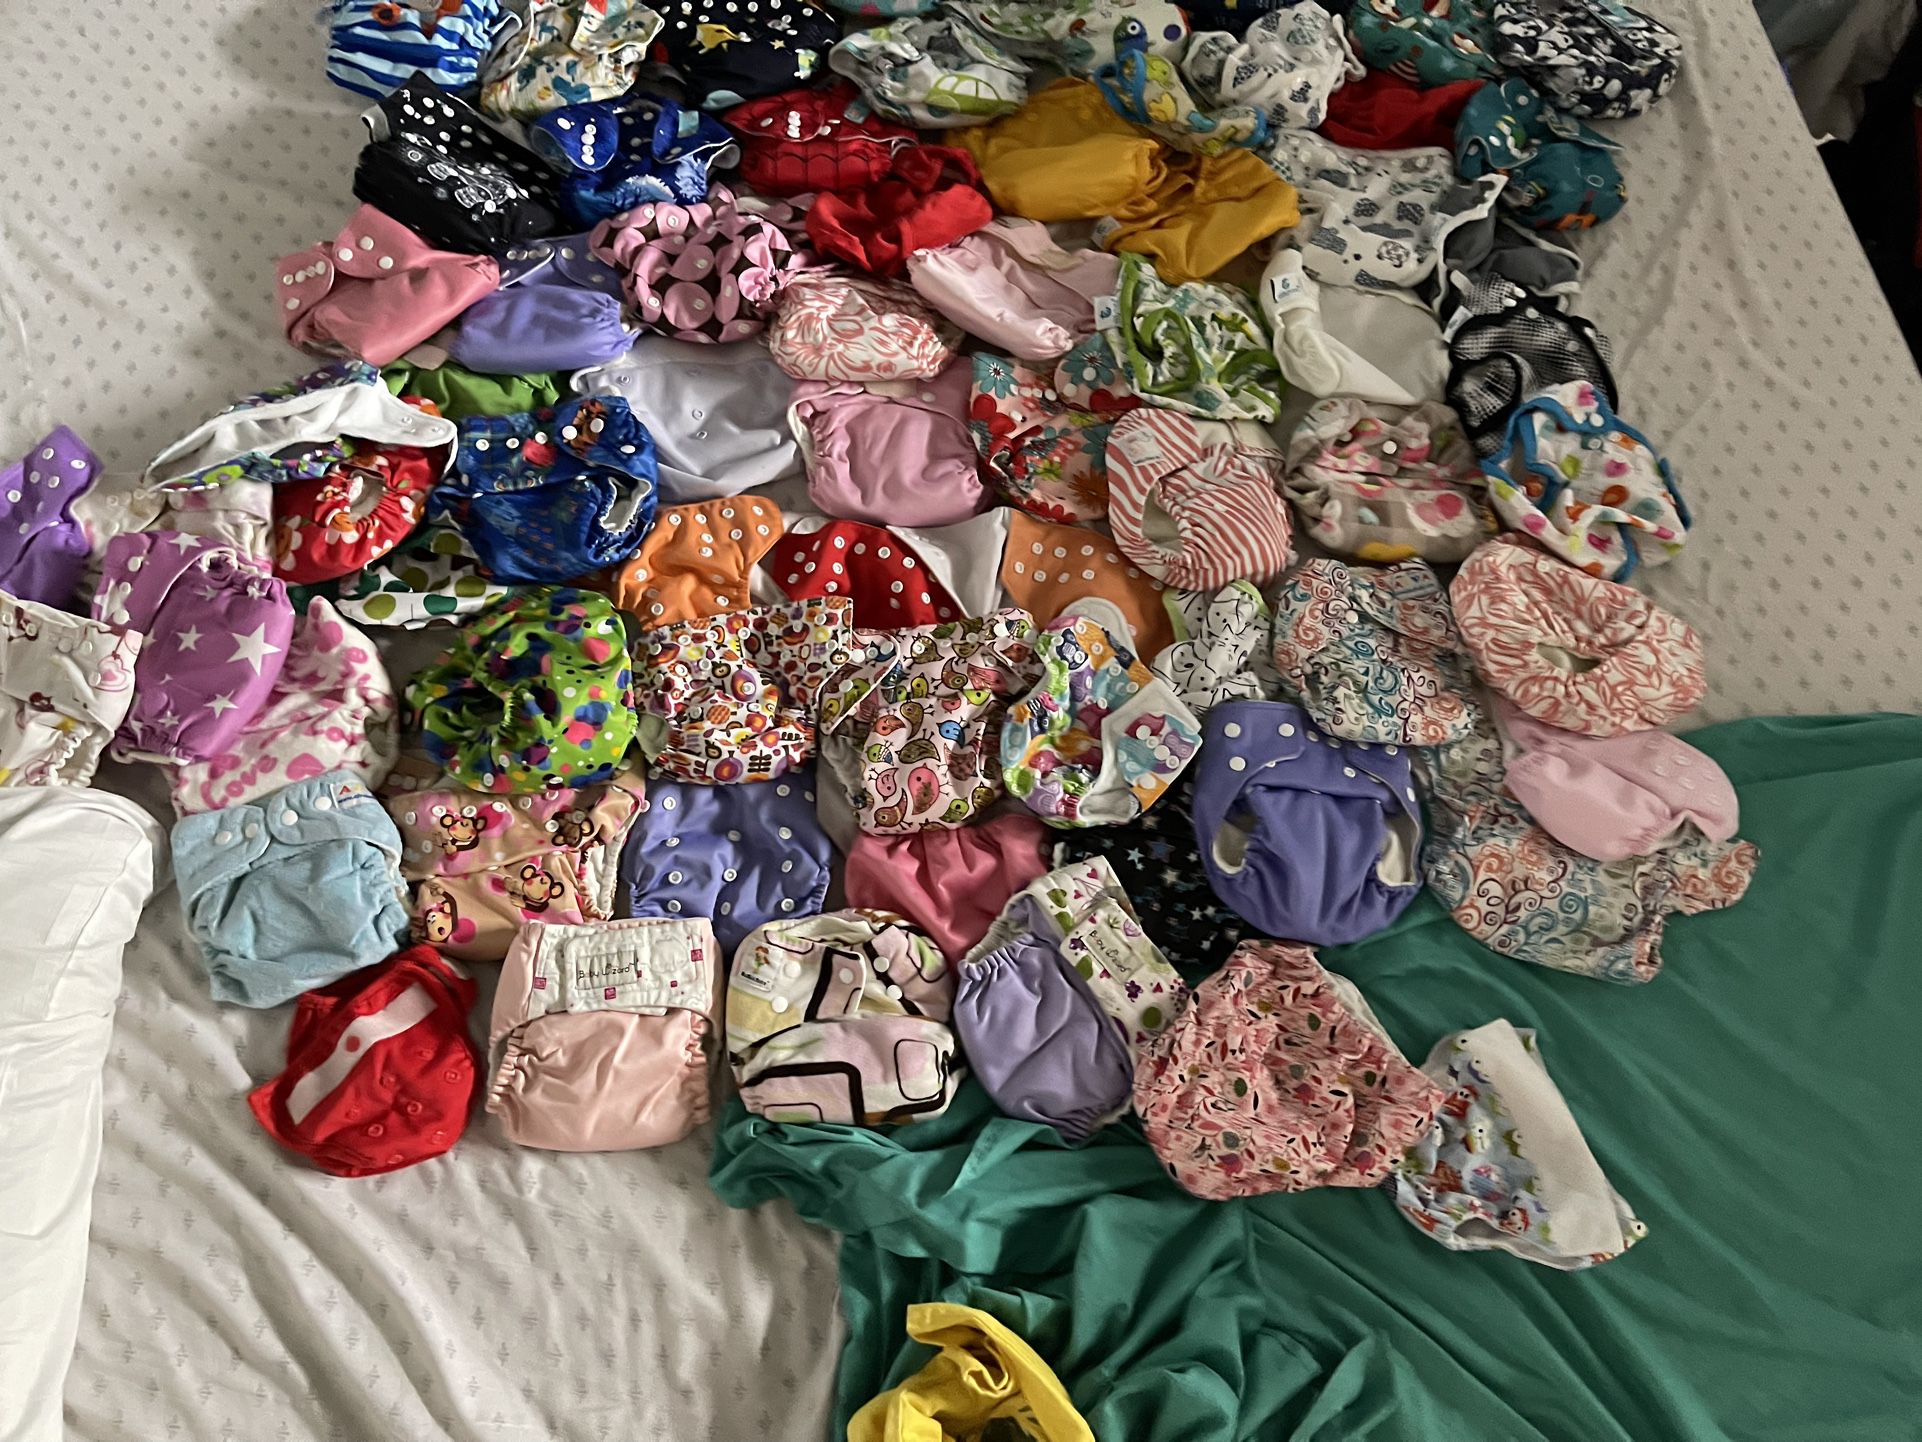 Over 80 Cloth Diapers, 100+bamboo Inserts, Several Rolls Of Liners